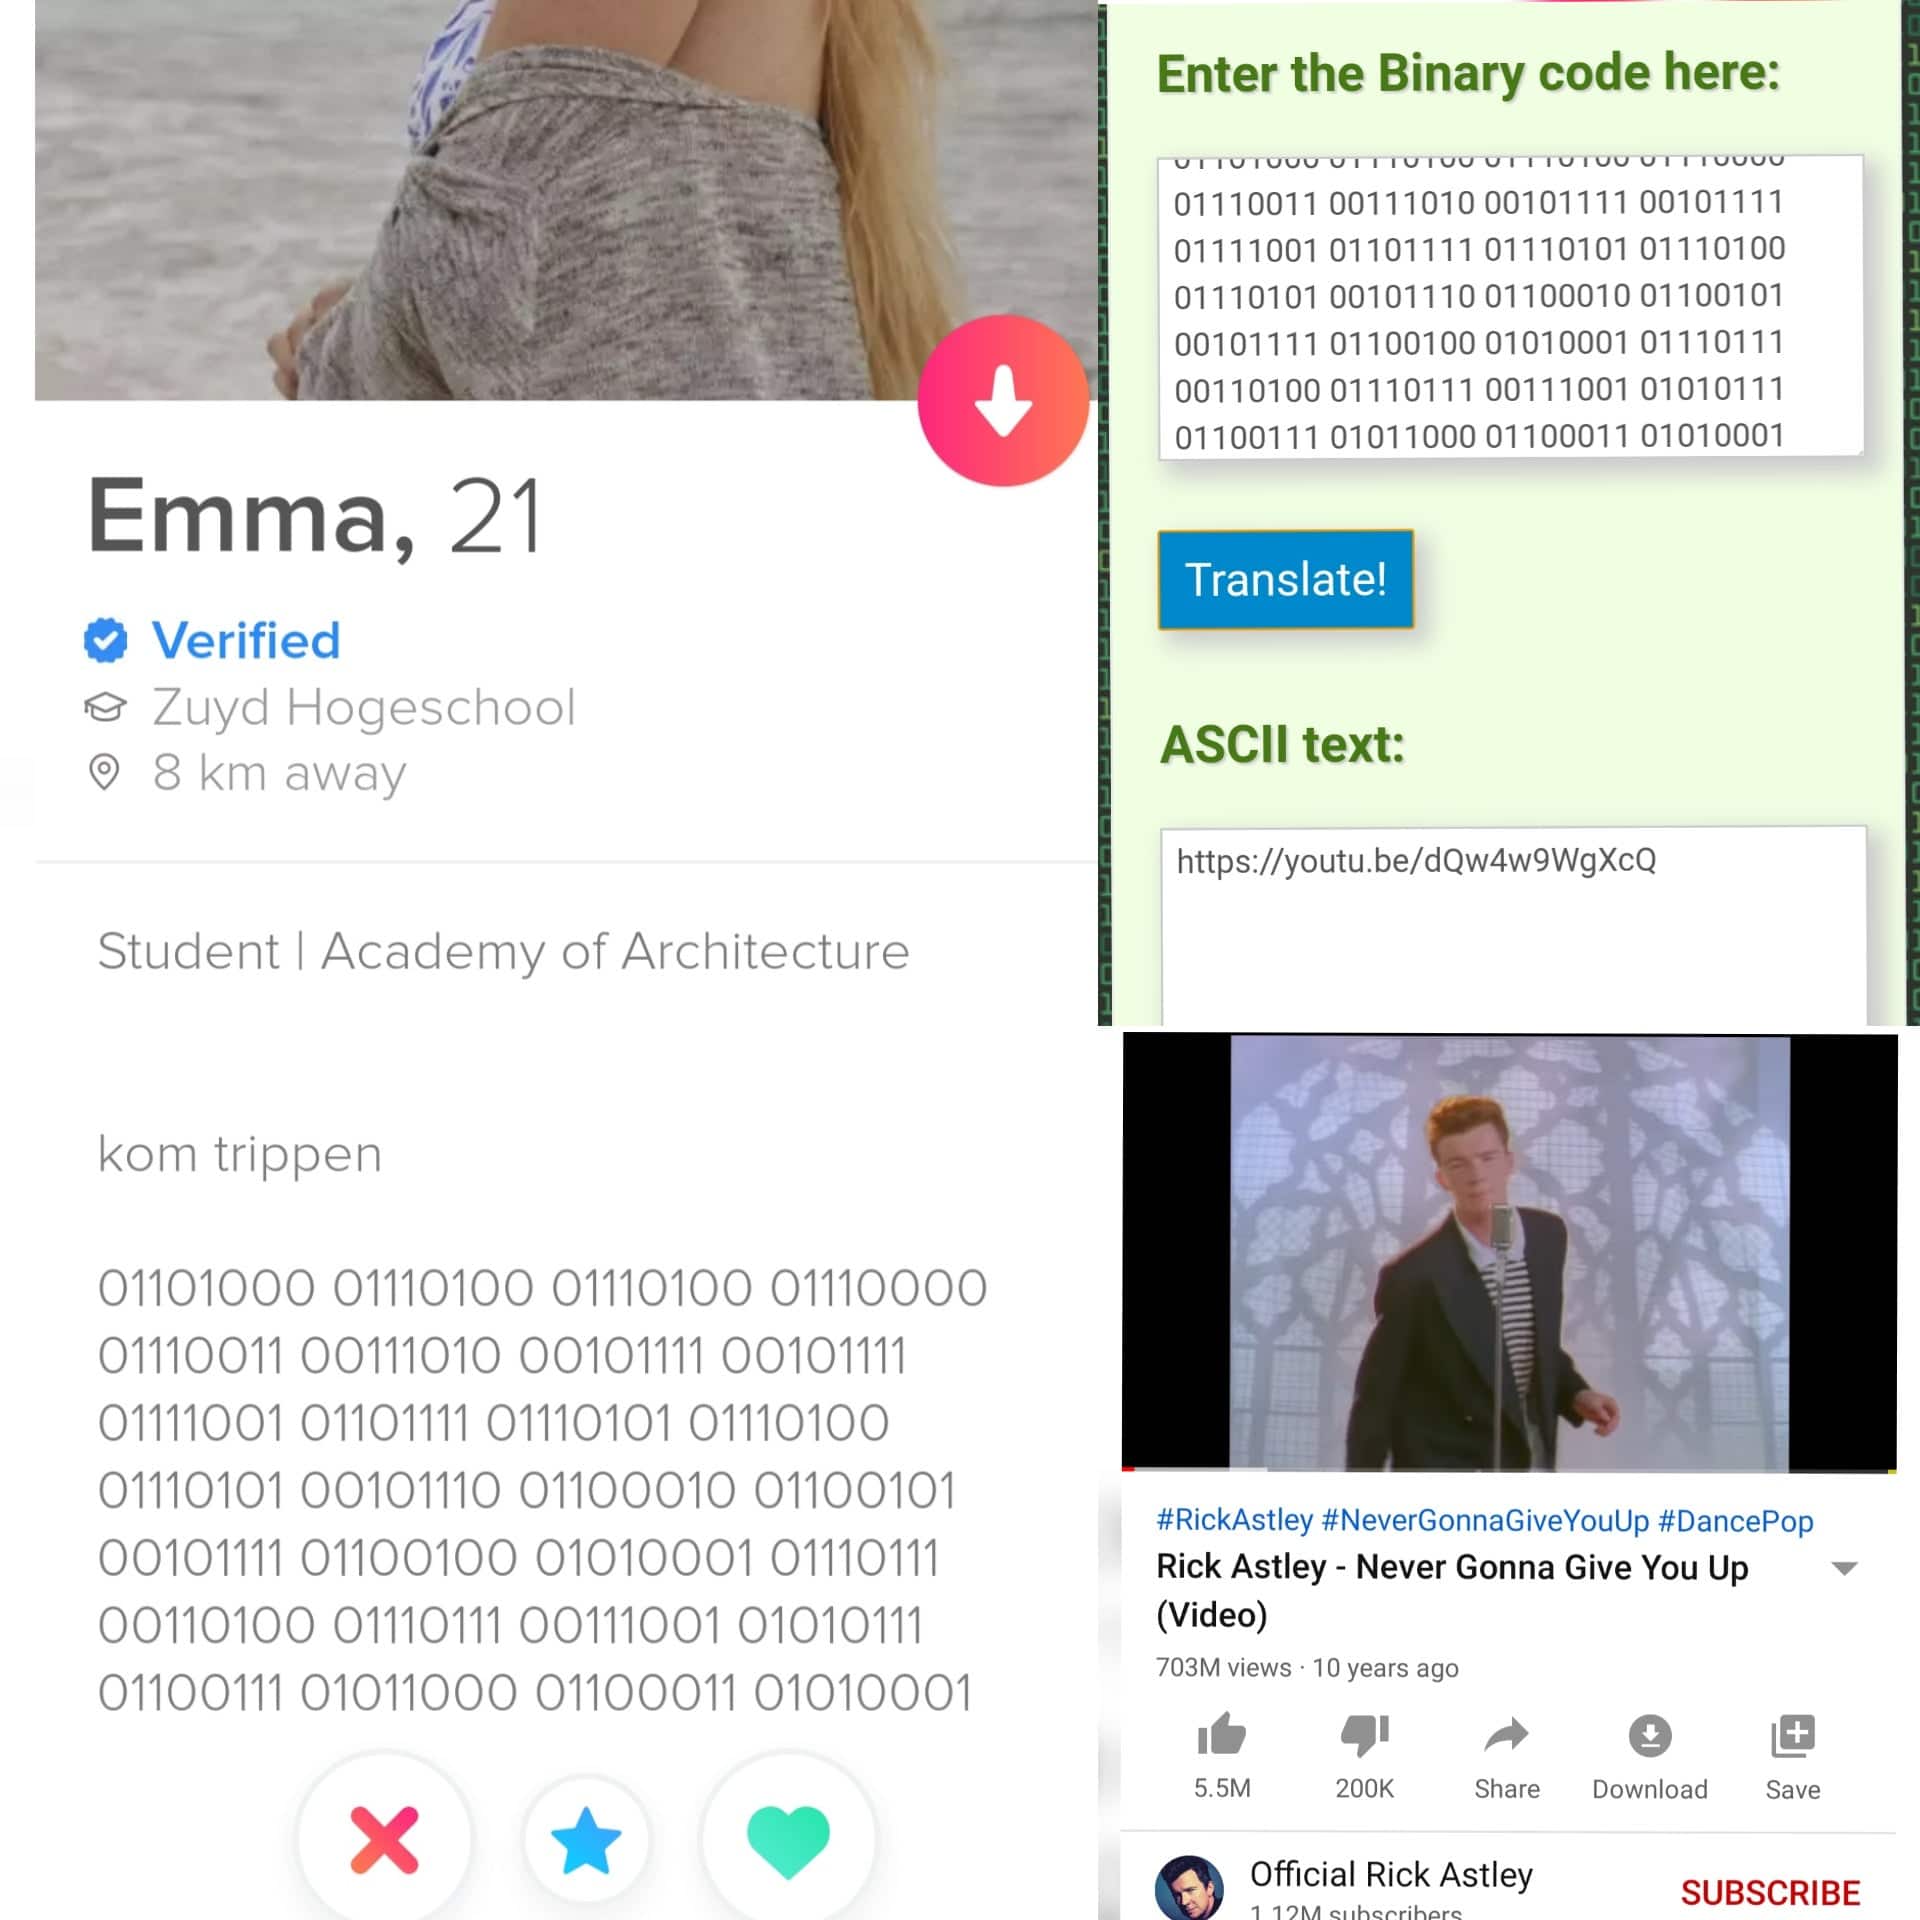 Funny, Tinder, IFqFJ, GEKOLONISEERD, Rick, Kom other memes Funny, Tinder, IFqFJ, GEKOLONISEERD, Rick, Kom text: . 05, Emma, Verified 21 Zuyd Hogeschool 0 8 km away Student I Academy of Architecture kom trippen 01101000 01110100 01110100 01110000 01110101 00101110 01100010 01100101 00110100 01110111 00111001 01010111 01100111 01011000 01100011 01010001 Enter the Binary code here: 01110101 001011100110001001100101 00110100 01110111 00111001 01010111 01100111 01011000 01100011 01010001 Translate! ASCII text: https://youtu.be/dQw4w9WgXcQ #RickAstley #NeverGonnaGiveYouUp #DancePop Rick Astley - Never Gonna Give You Up (Video) 703M views • 10 years ago 5.5M 200K Share Download Save Official Rick Astley SUBSCRIBE 